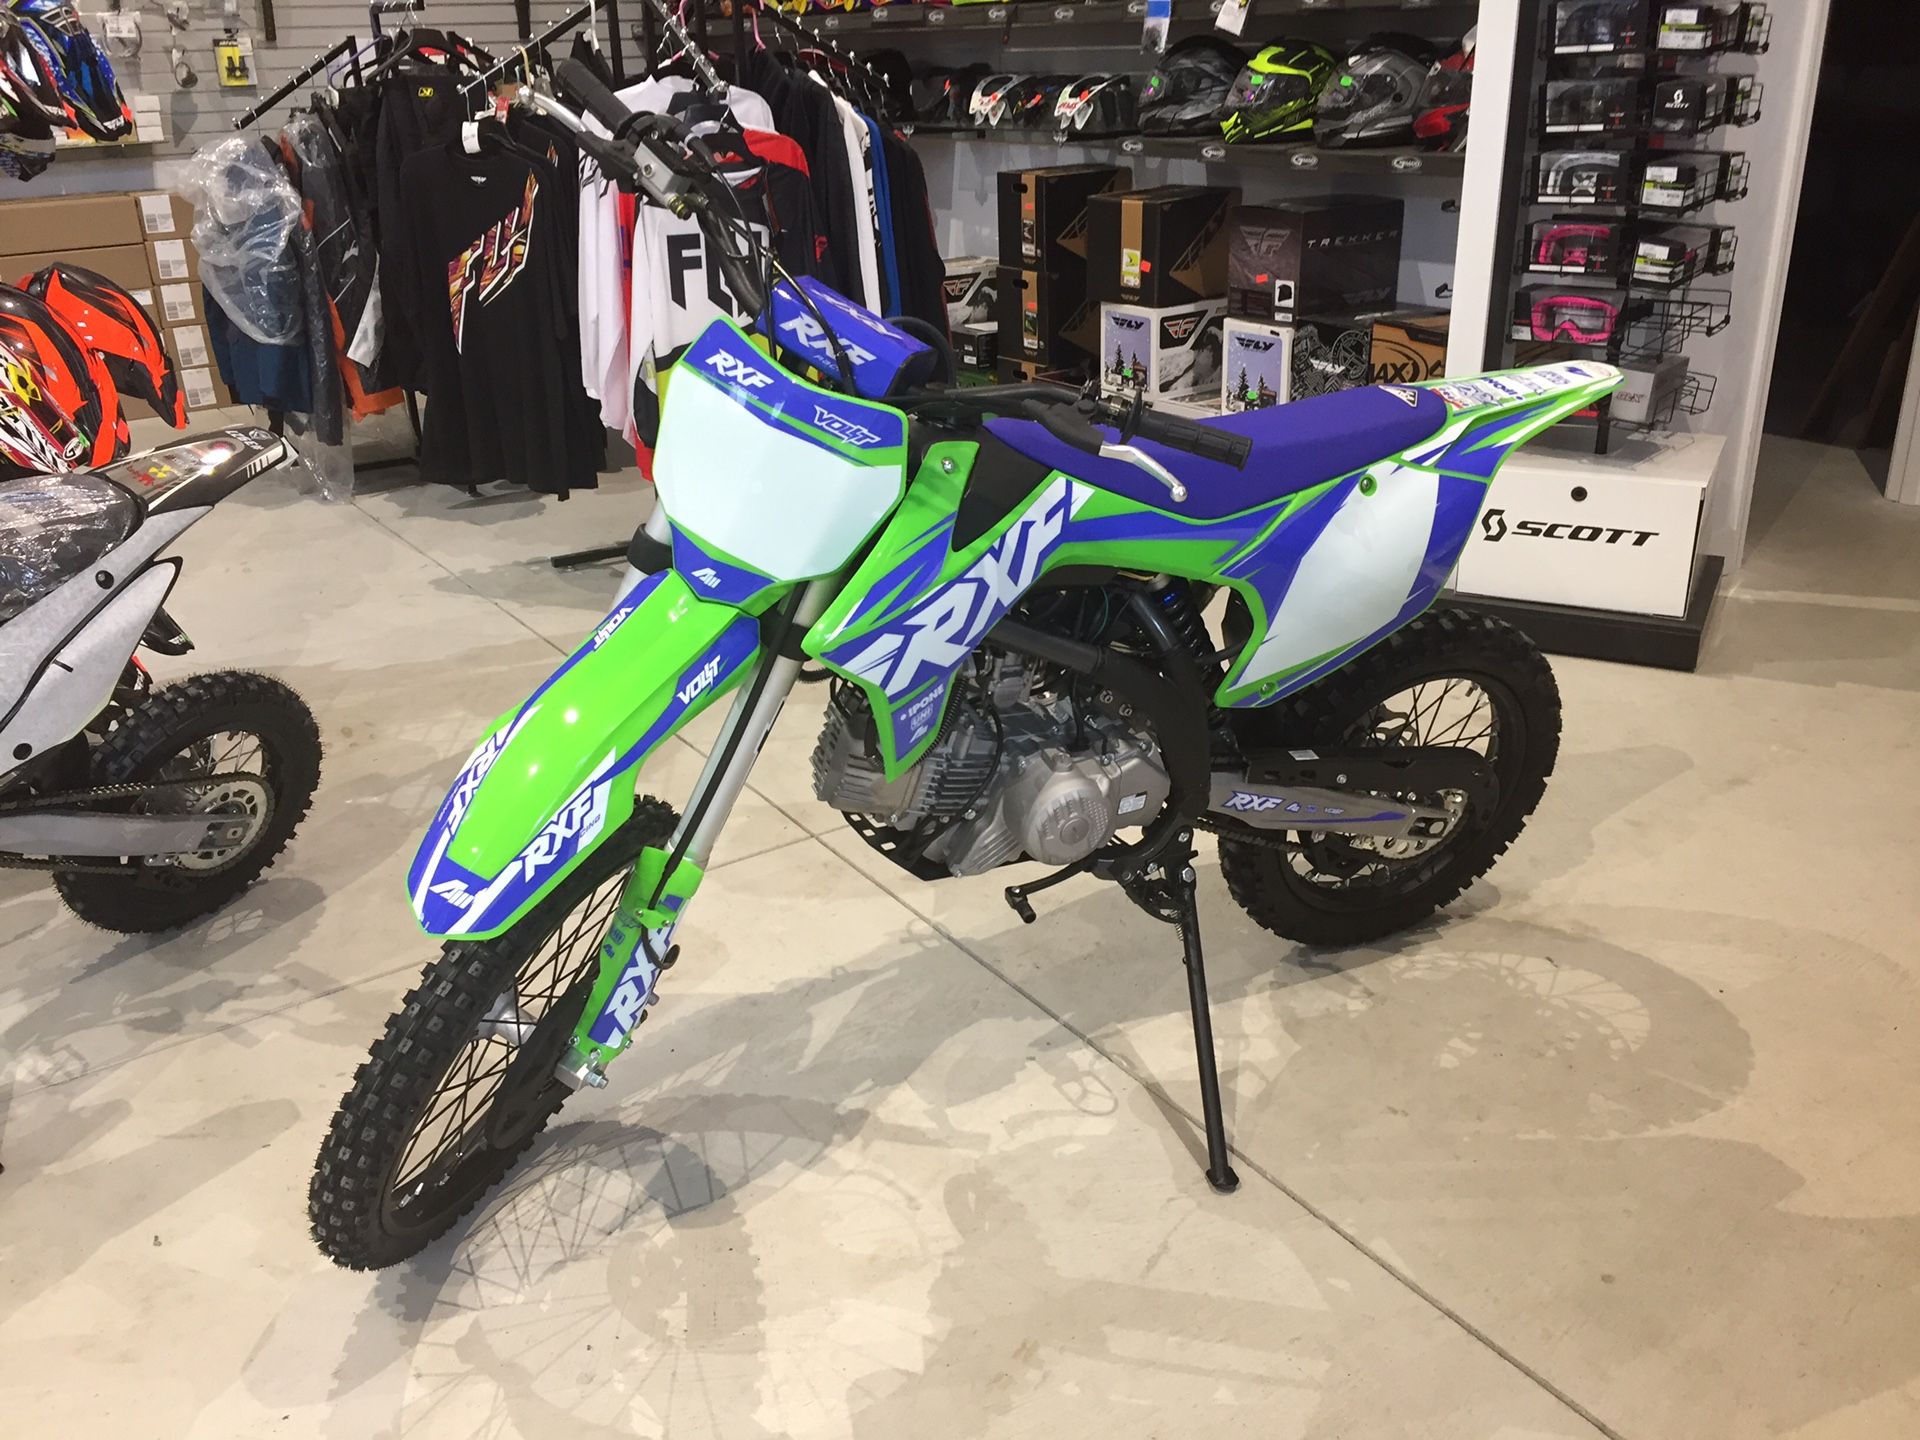 2020 Apollo RXF200 RXF 200 Freeride 190cc dirt bike electric start hour Meter will trade